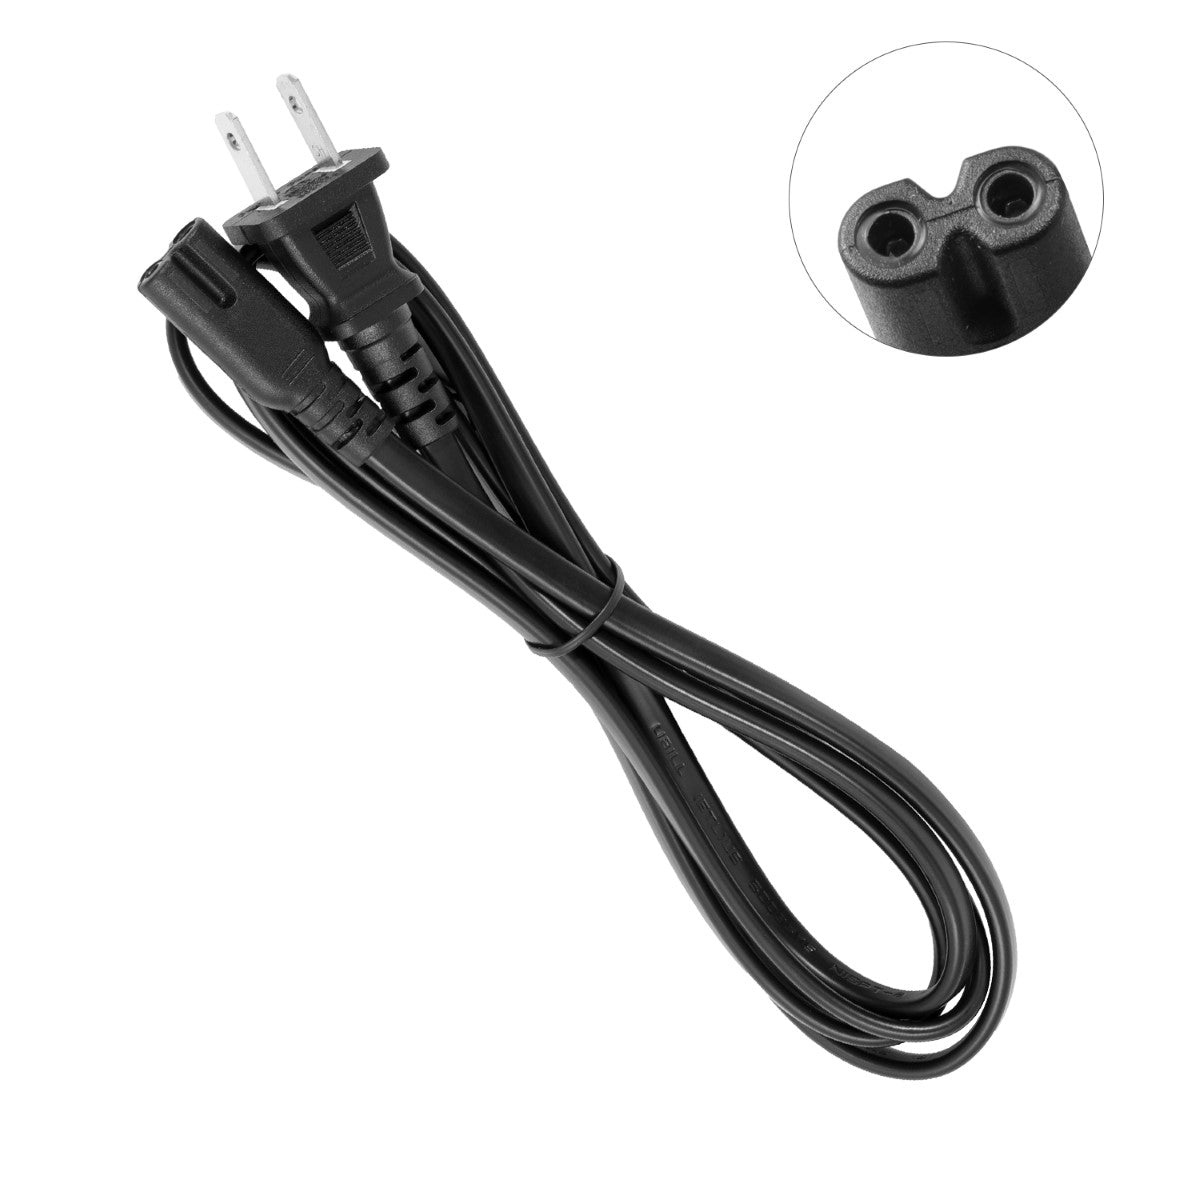 Power Cord for HP ENVY 110 e-All-in-One Printer.